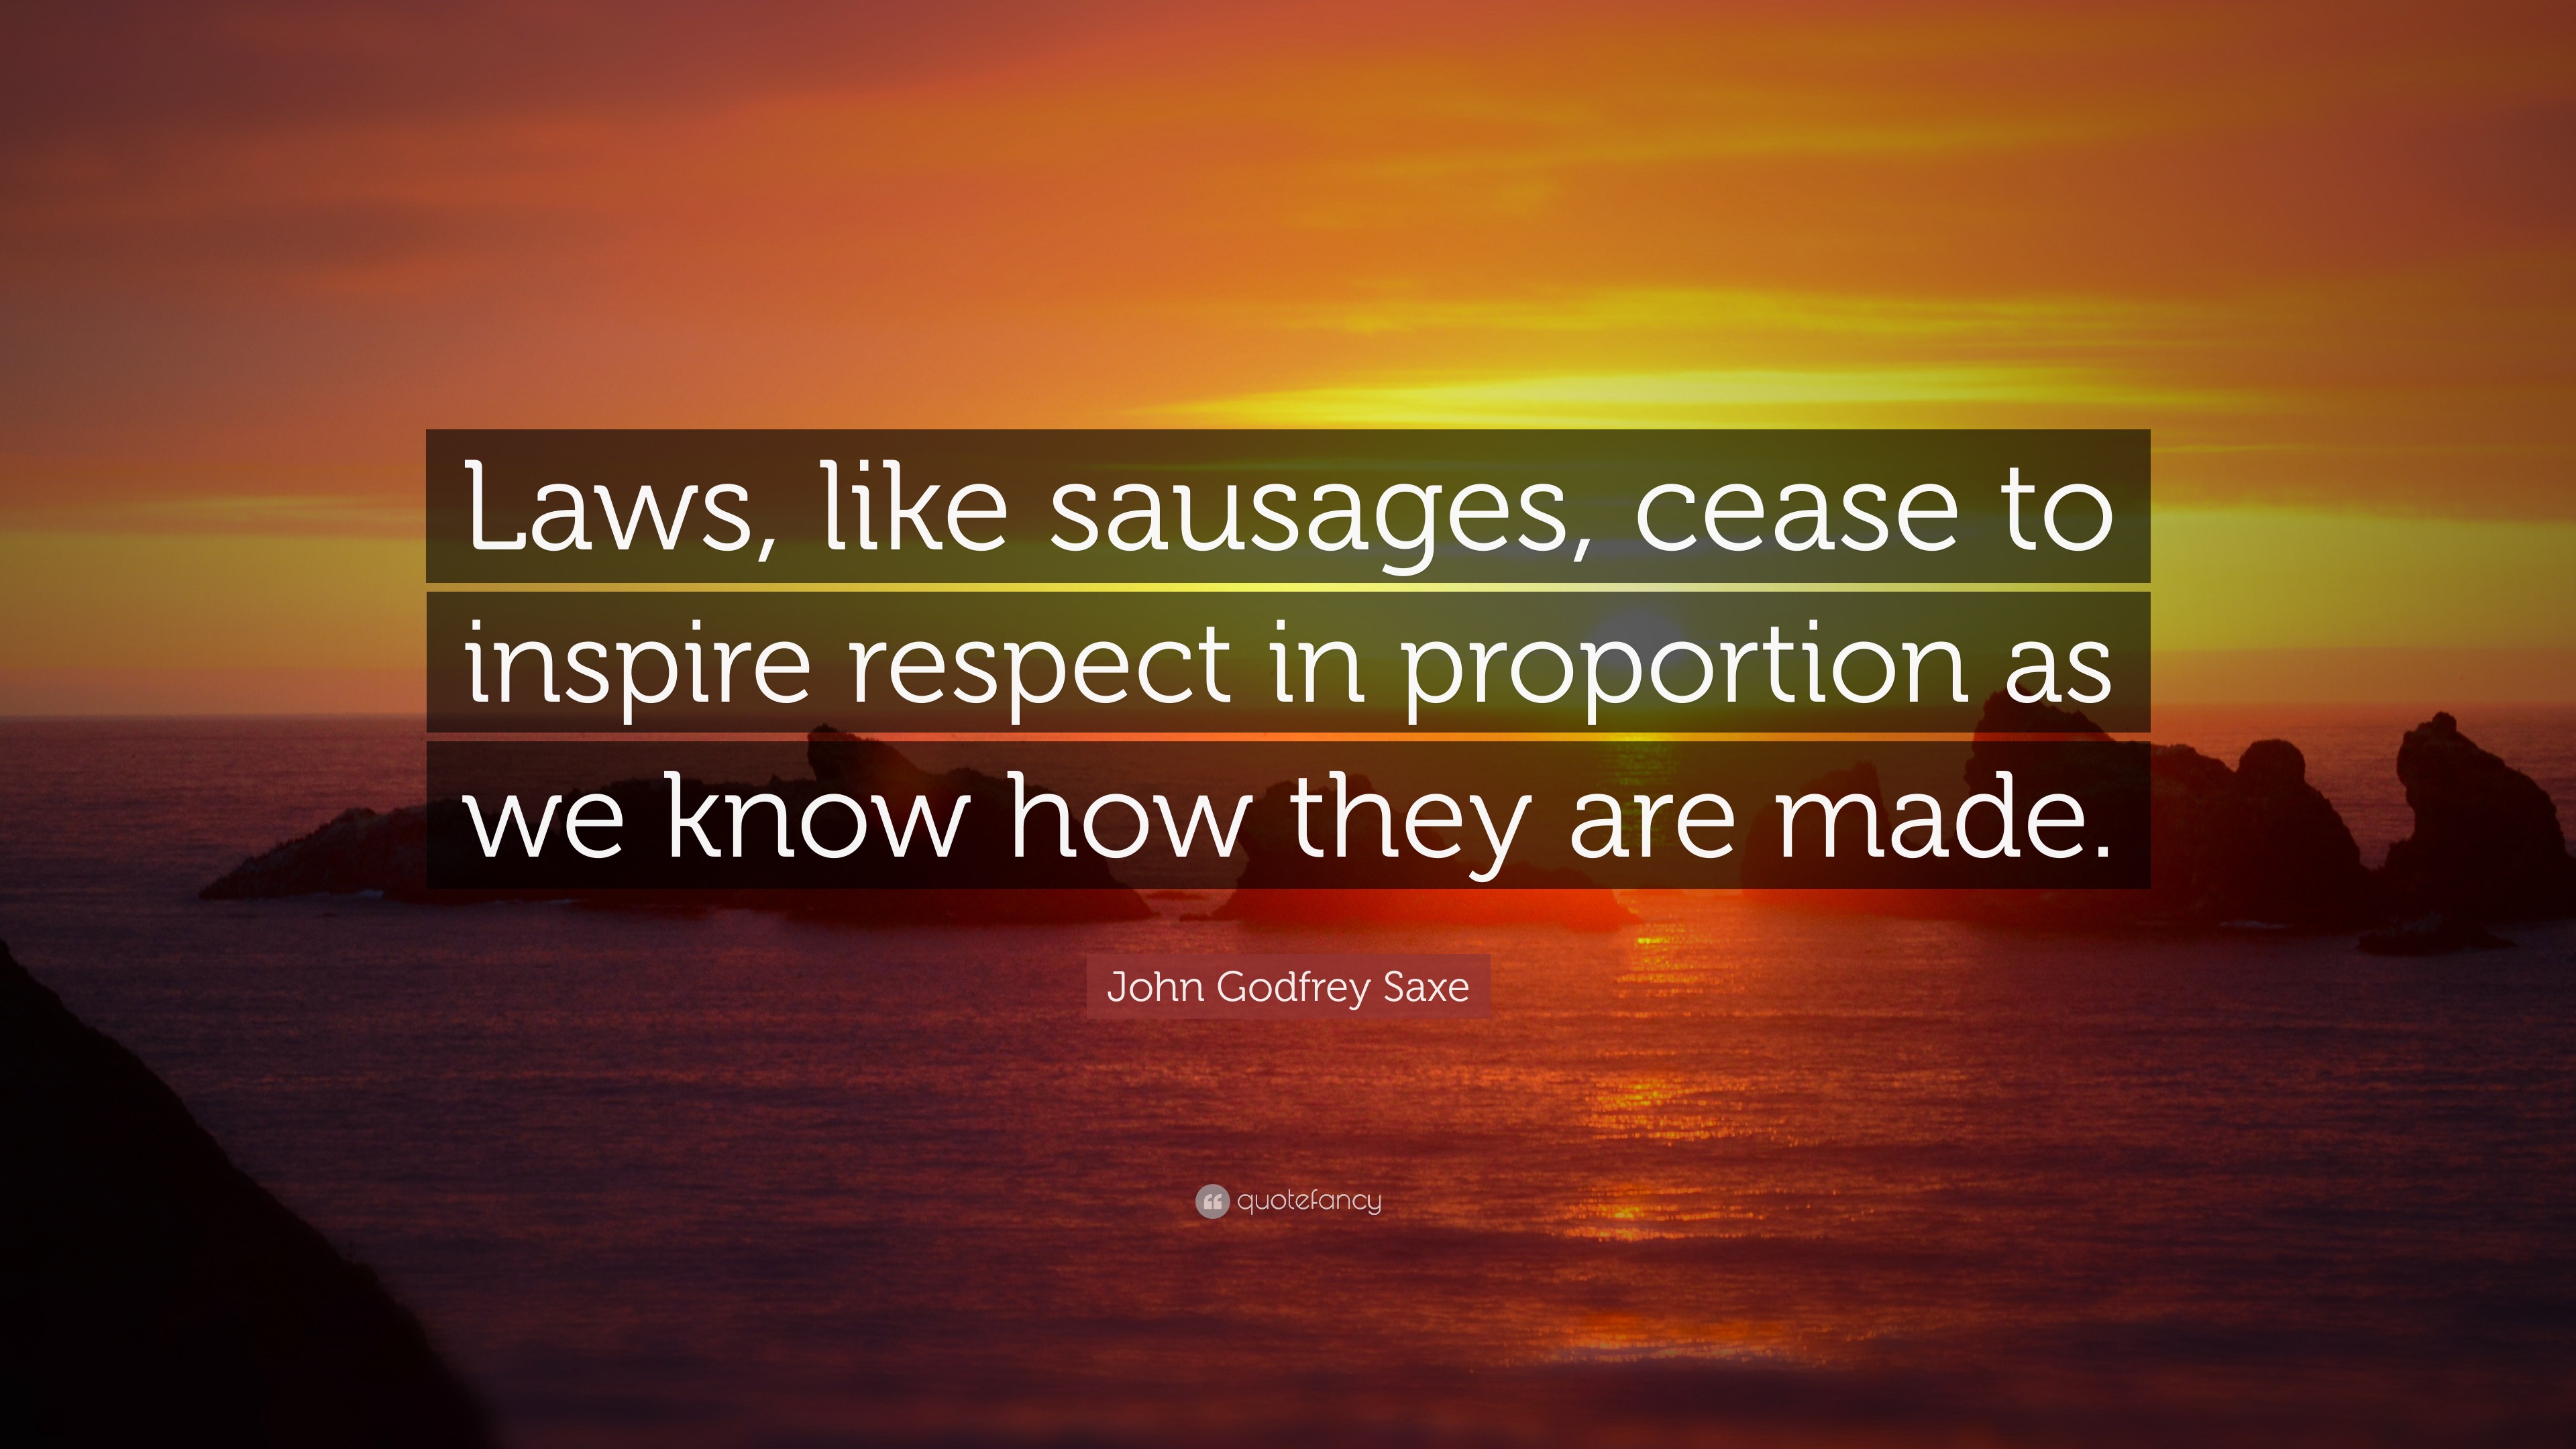 6732601-John-Godfrey-Saxe-Quote-Laws-like-sausages-cease-to-inspire.jpg